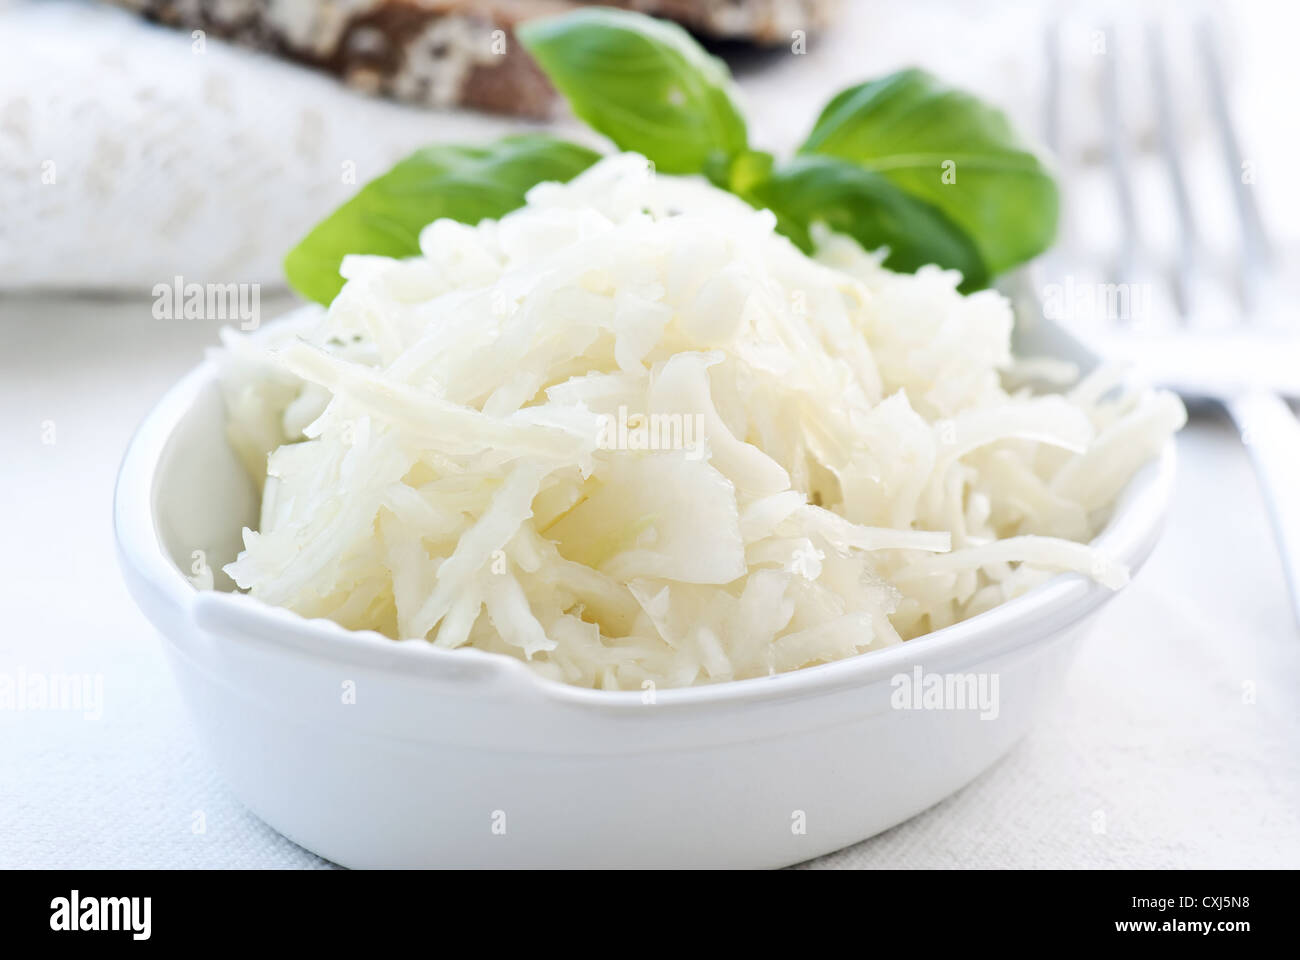 coleslaw as closeup in a bowl Stock Photo